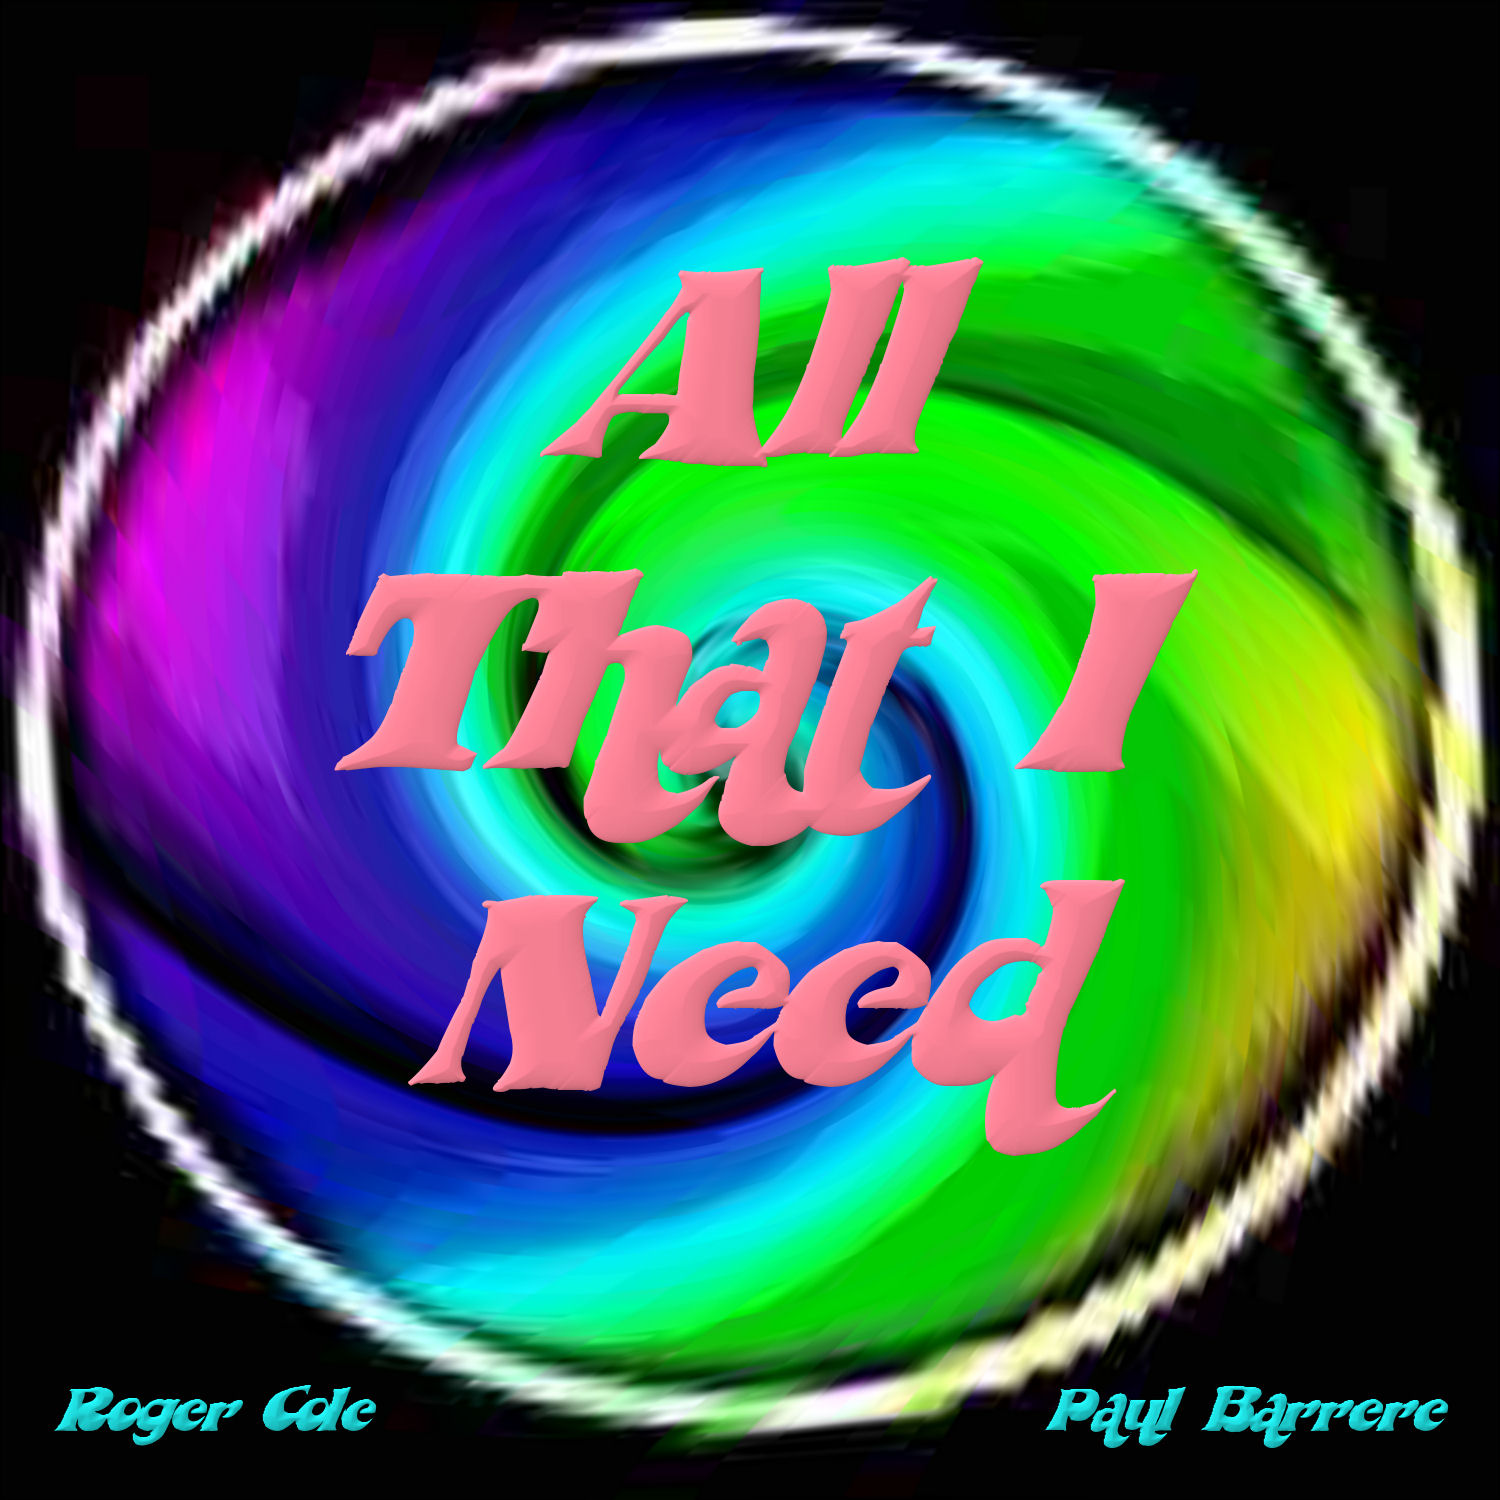  Roger Cole & Paul Barrere – “All That I Need”